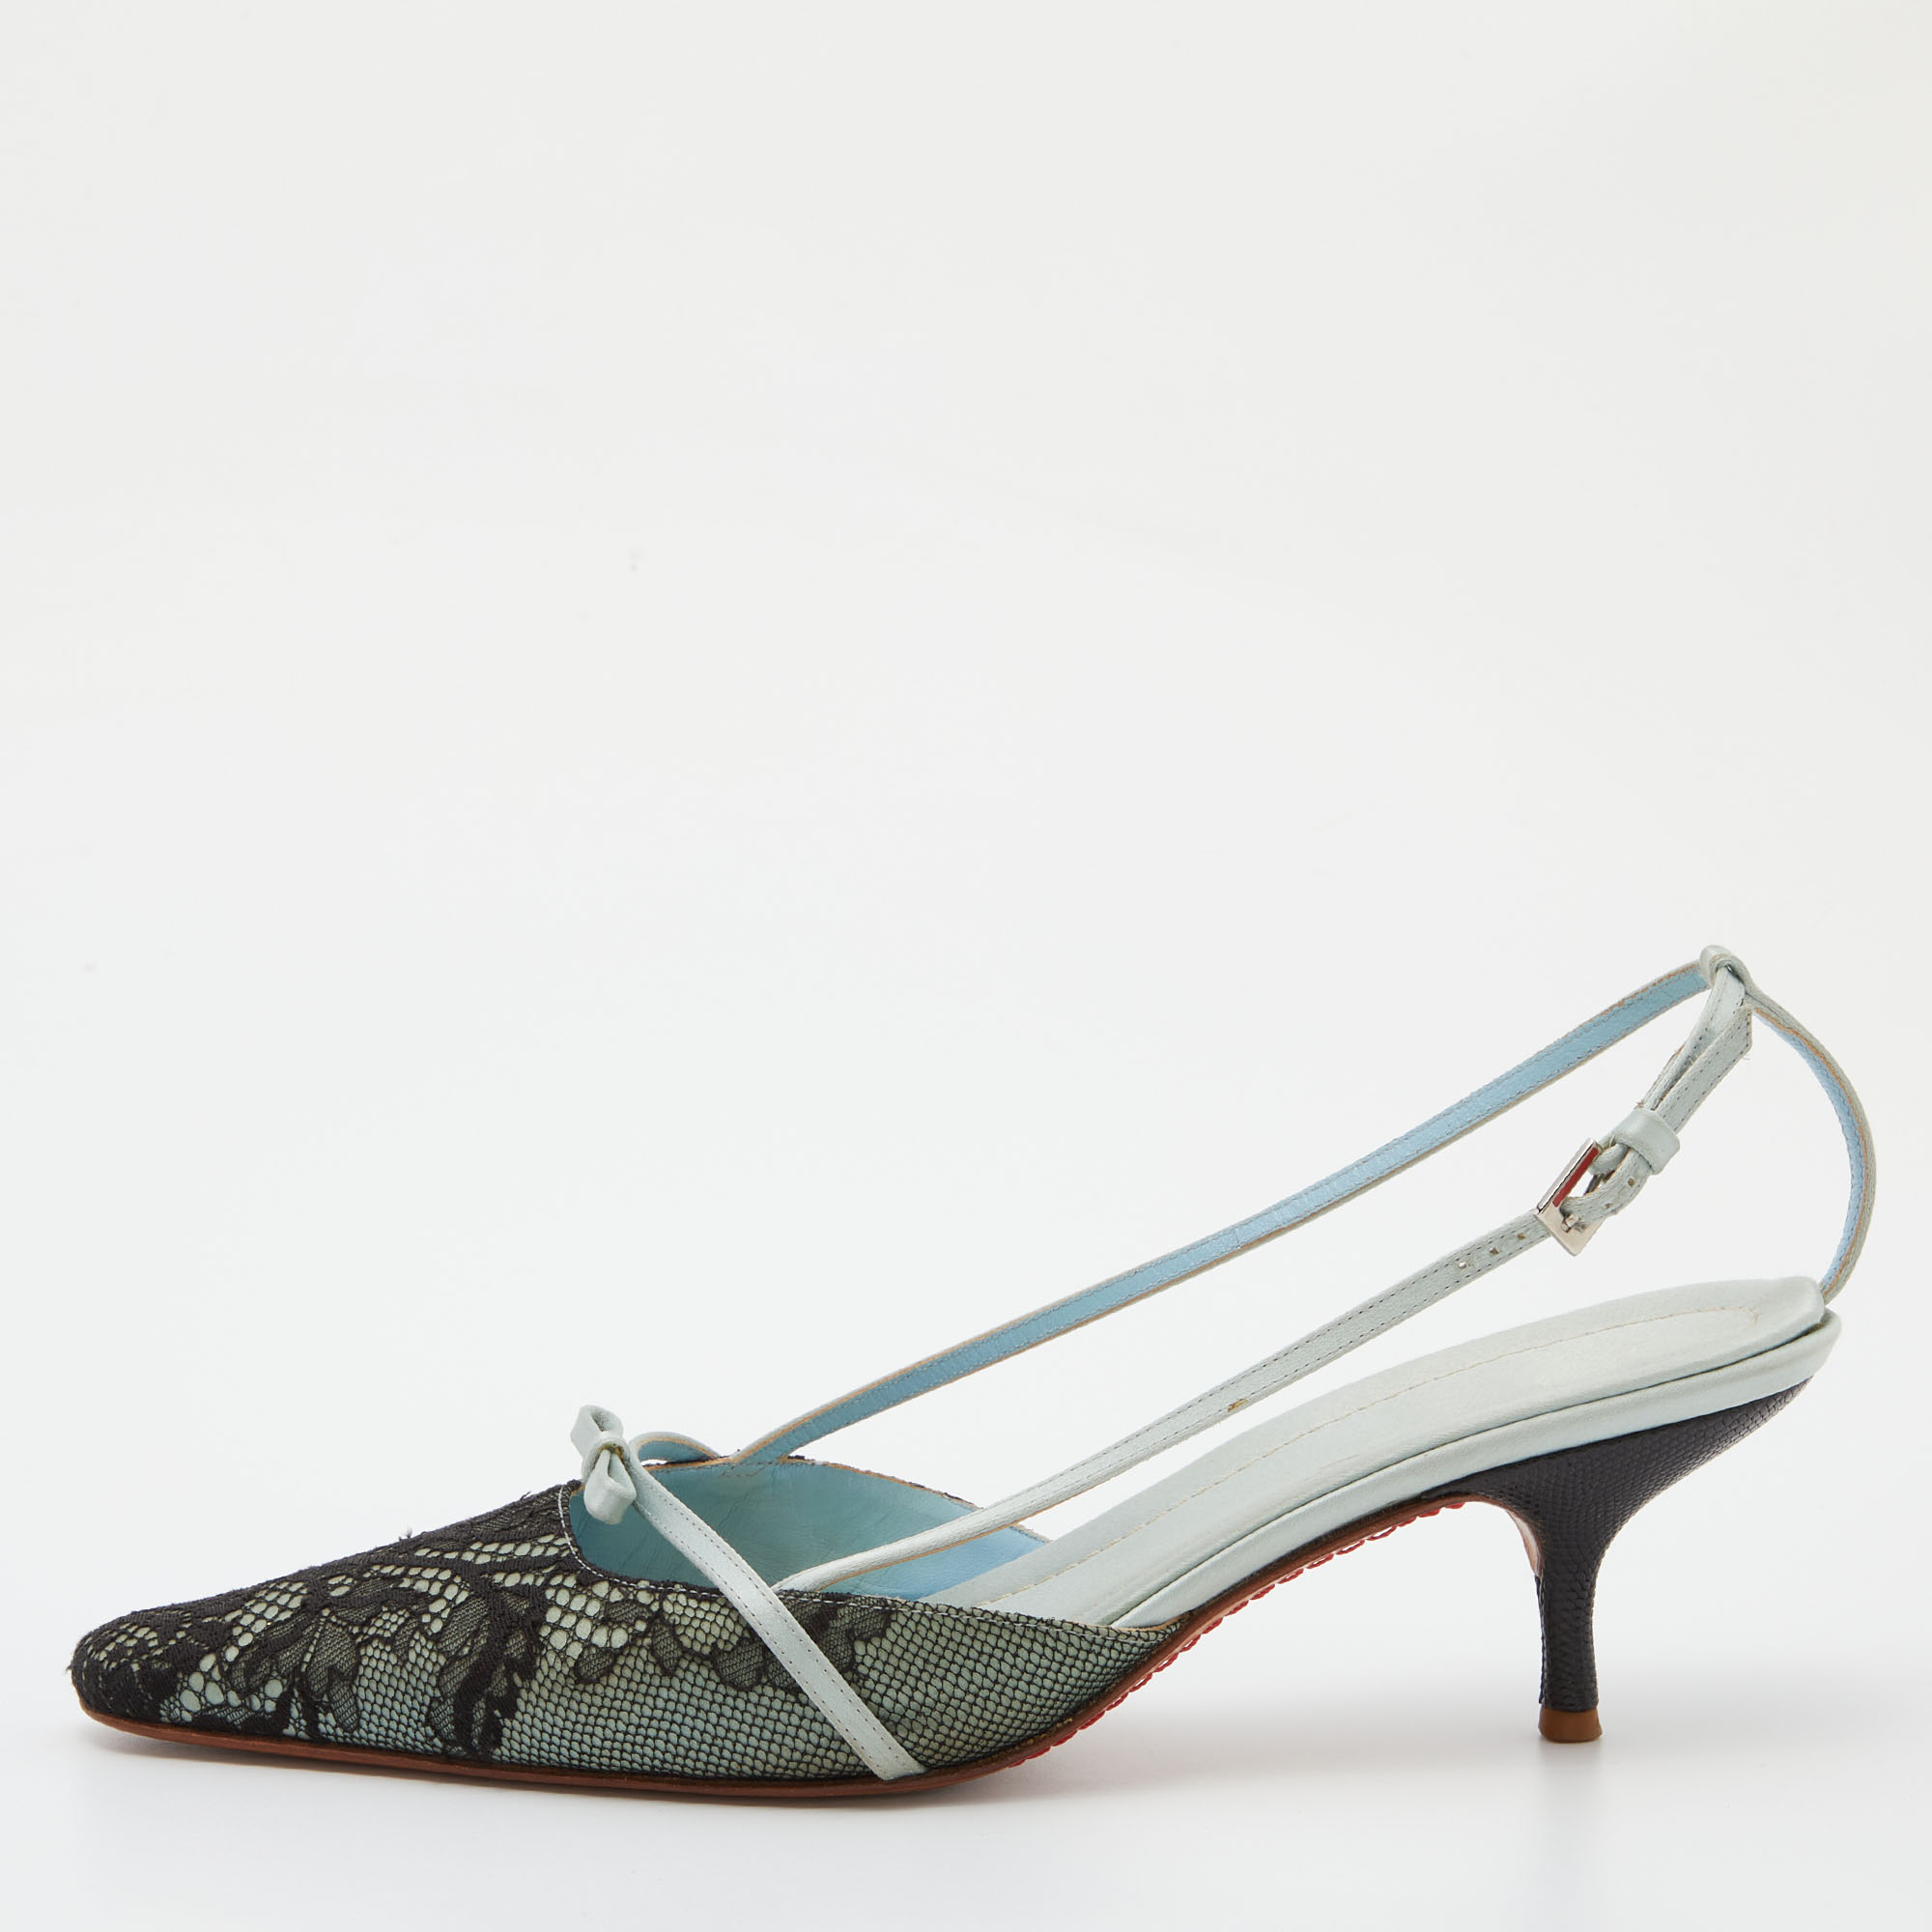 Pre-owned Valentino Garavani Black/green Lace And Satin Bow Slingback Pumps Size 39